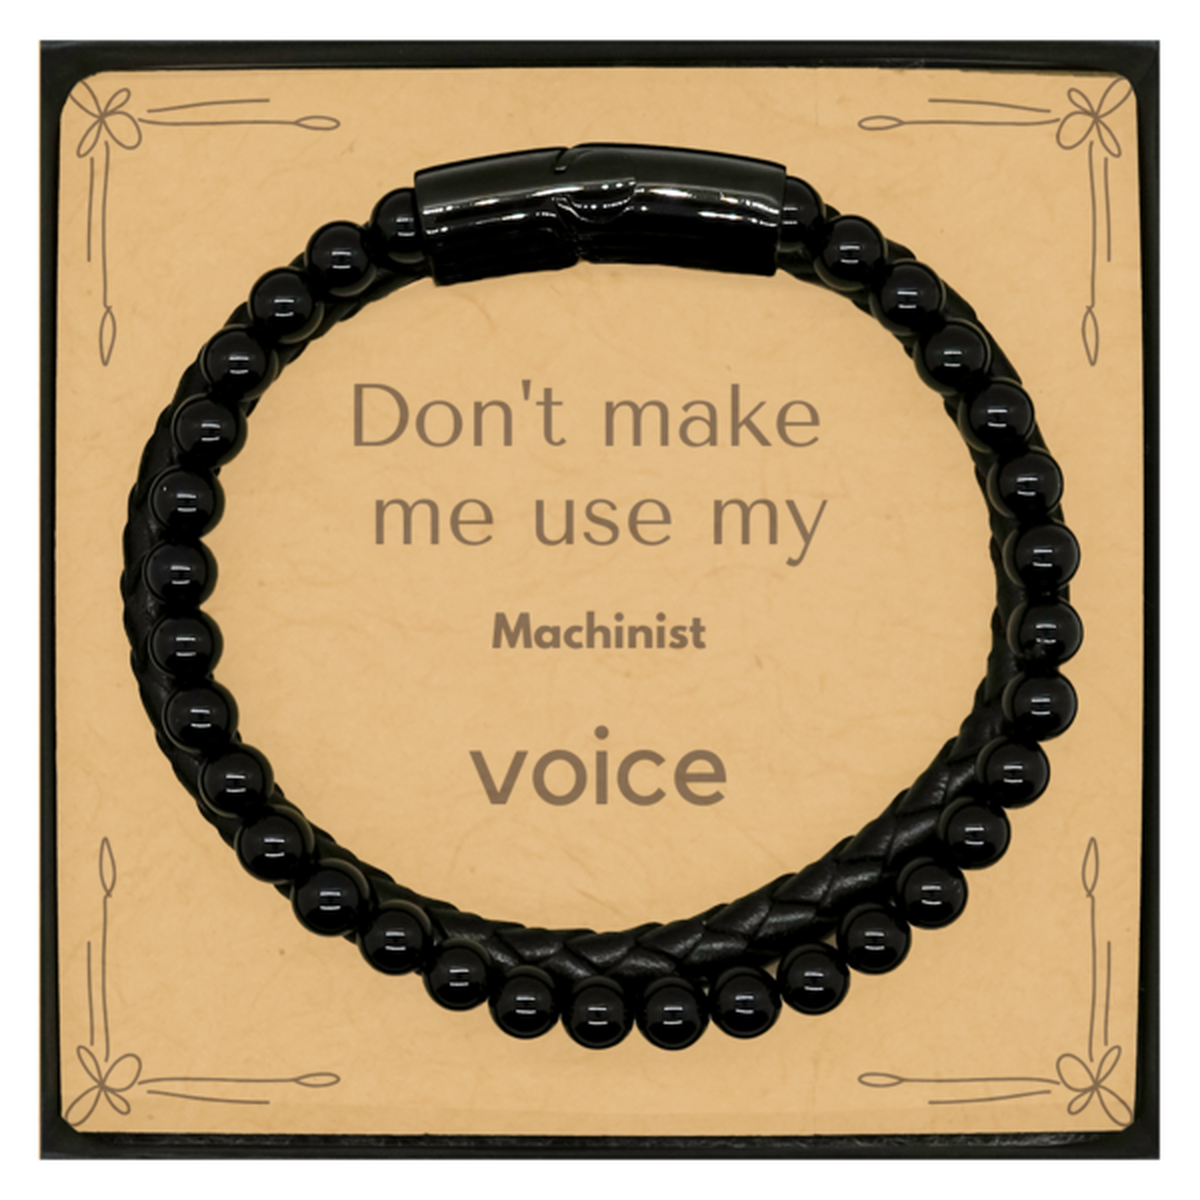 Don't make me use my Machinist voice, Sarcasm Machinist Card Gifts, Christmas Machinist Stone Leather Bracelets Birthday Unique Gifts For Machinist Coworkers, Men, Women, Colleague, Friends